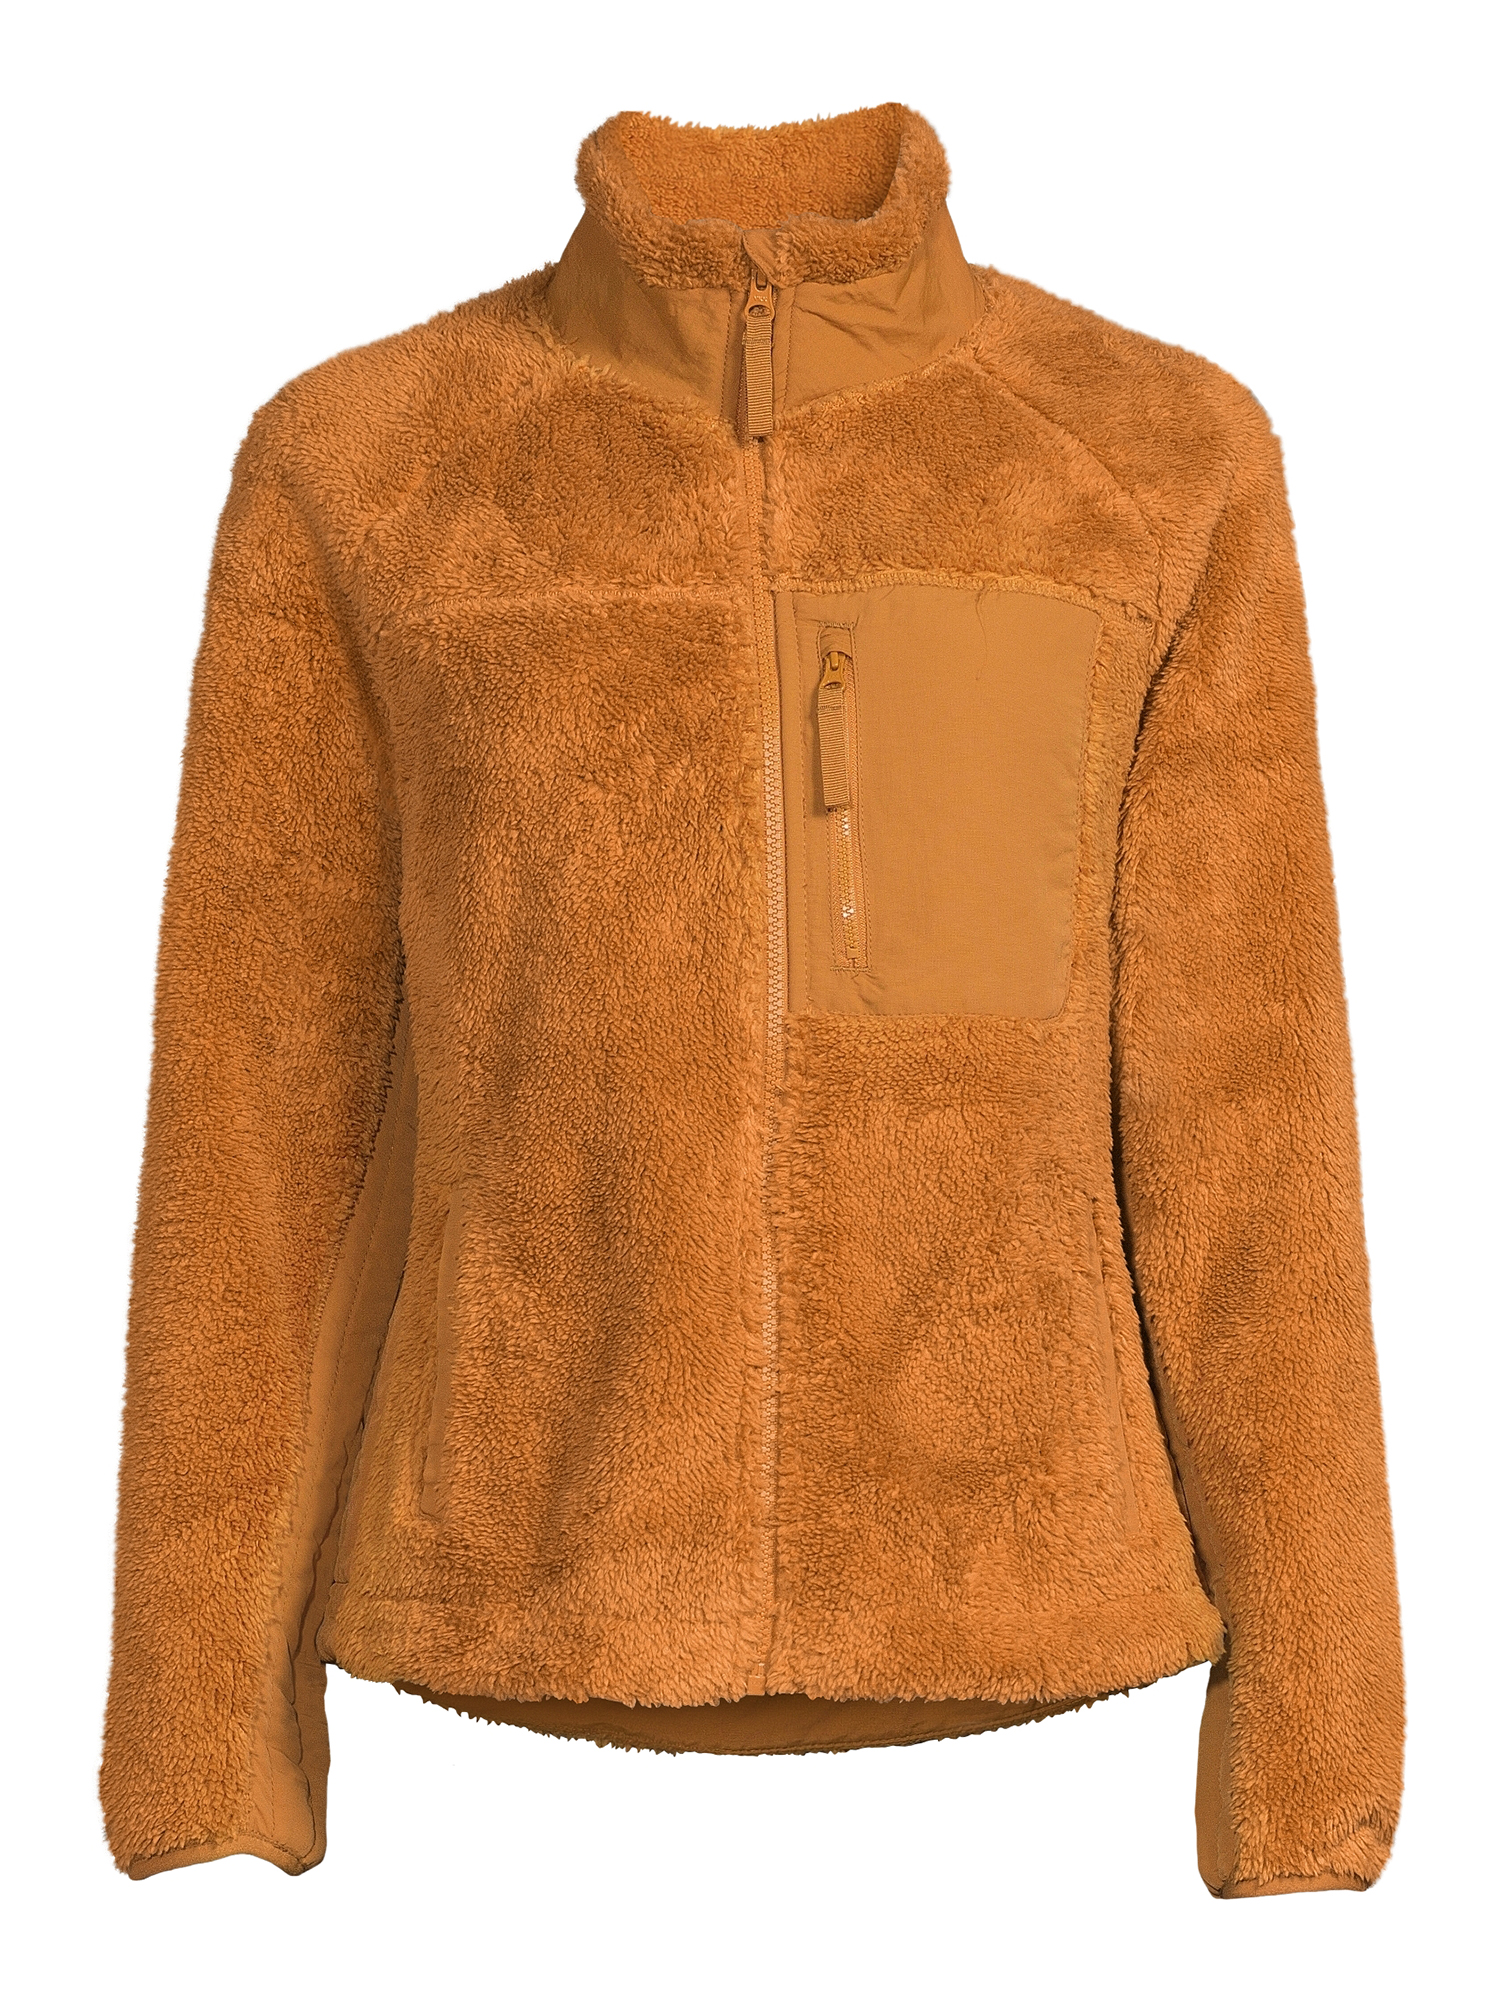 Time and Tru Women's and Plus Bonded Fleece Jacket - image 2 of 6